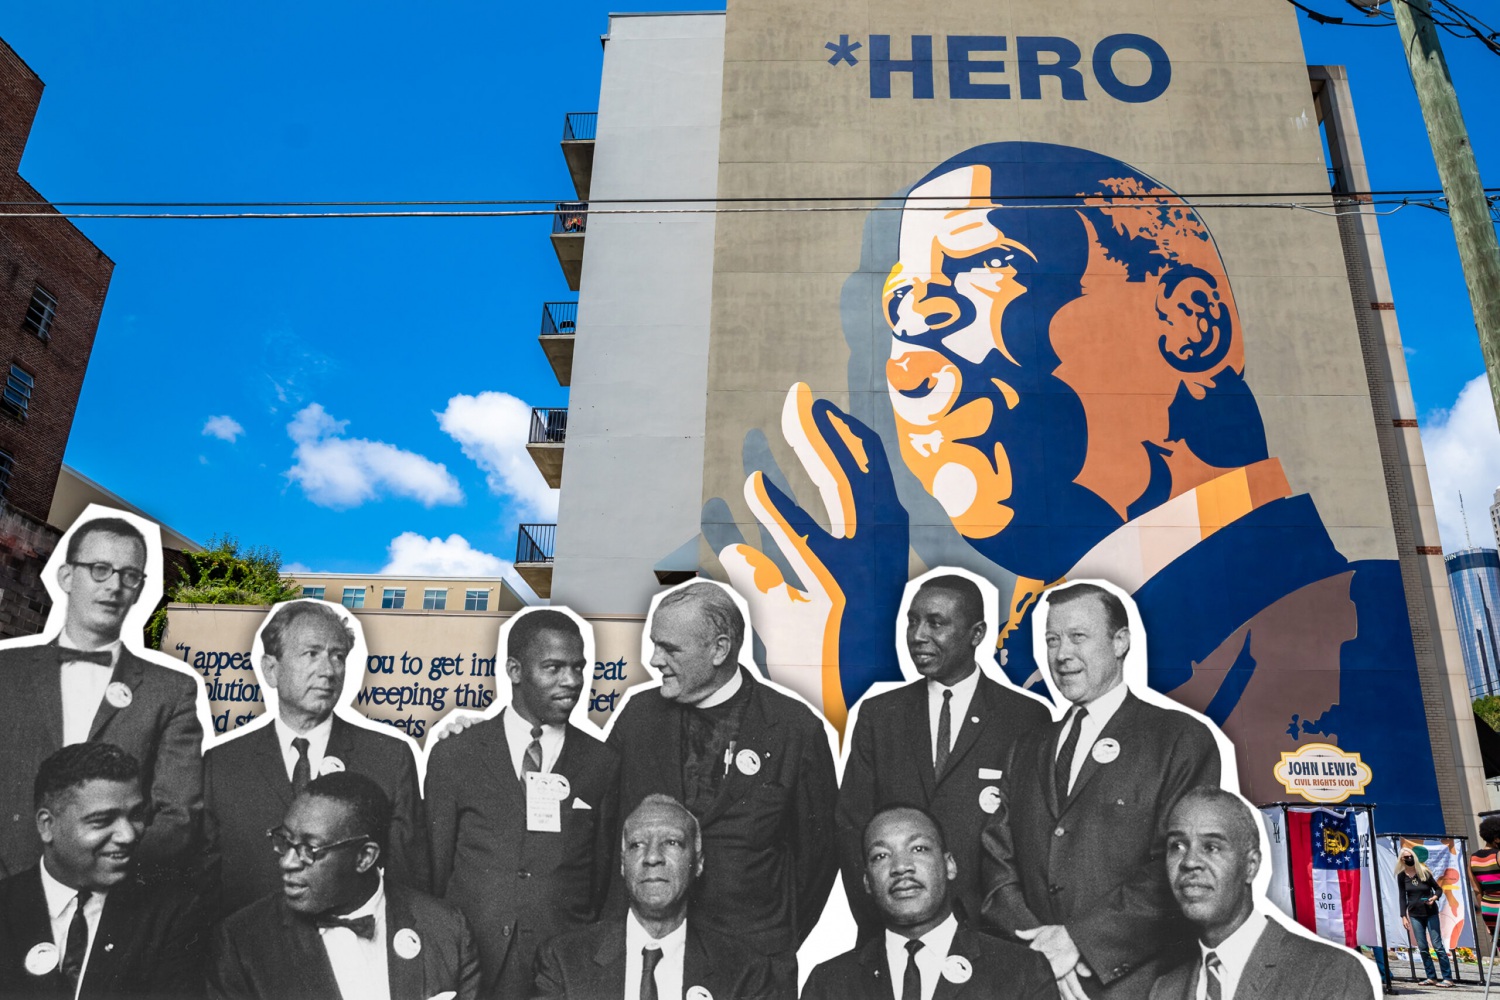 Black and white image of historic Black rights leaders superimposed on photo of a mural of John Lewis with the word "HERO"